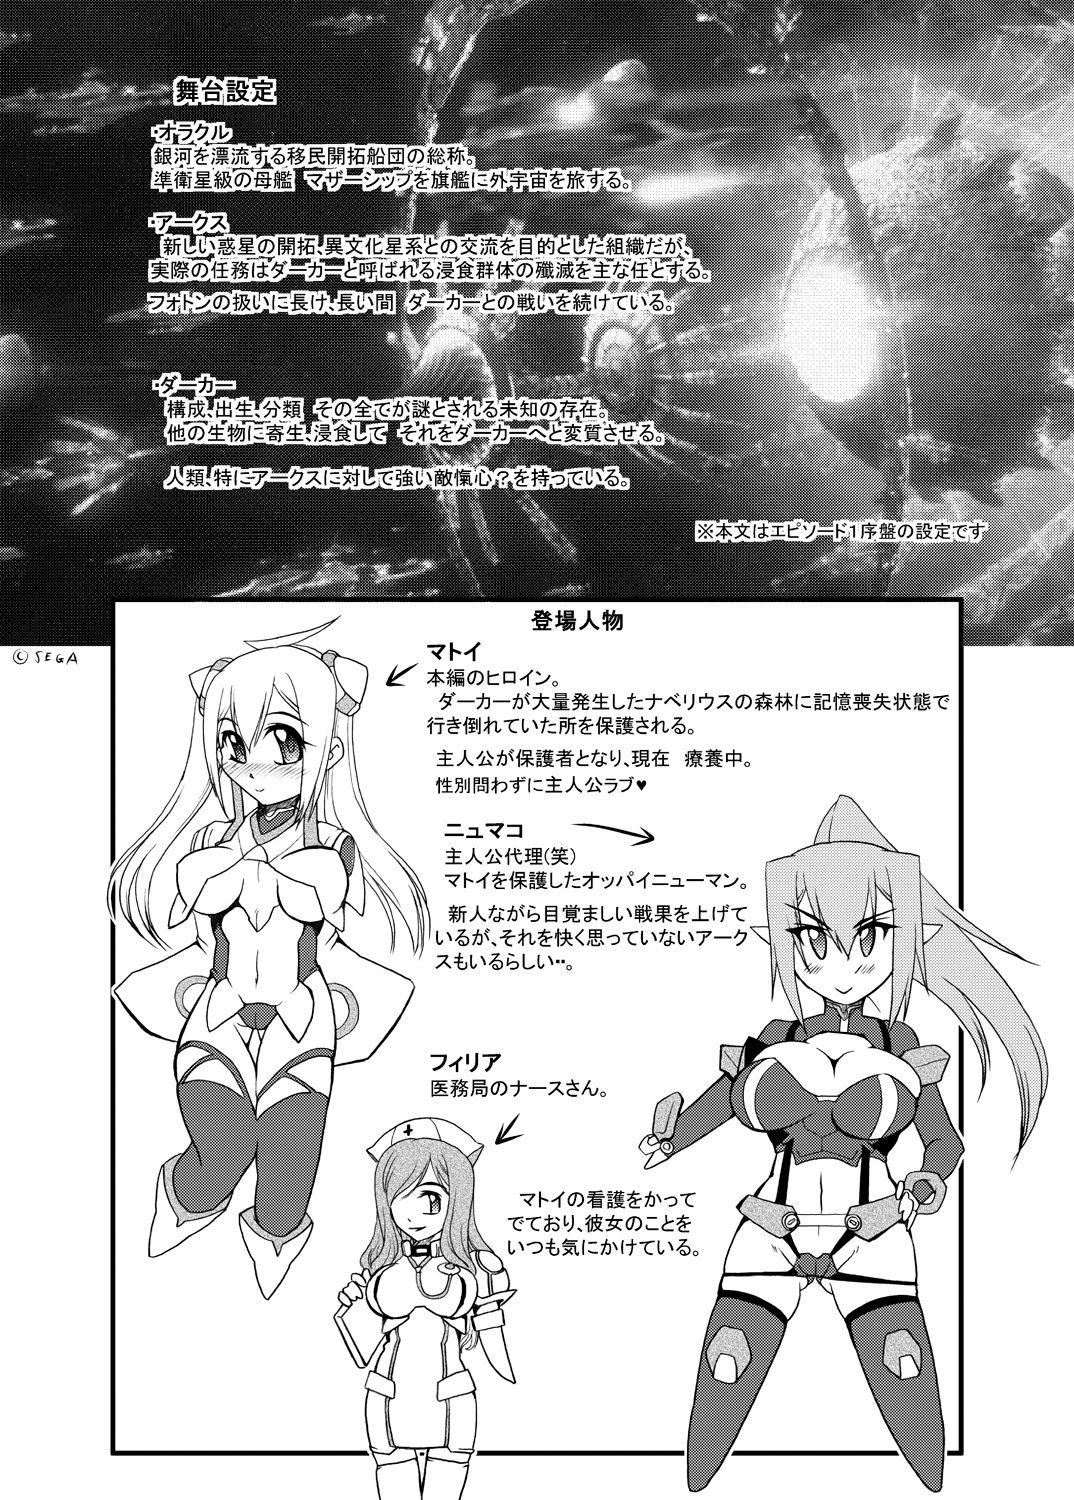 Porno Amateur MATTER BOARD X - Phantasy star online 2 Relax - Page 4